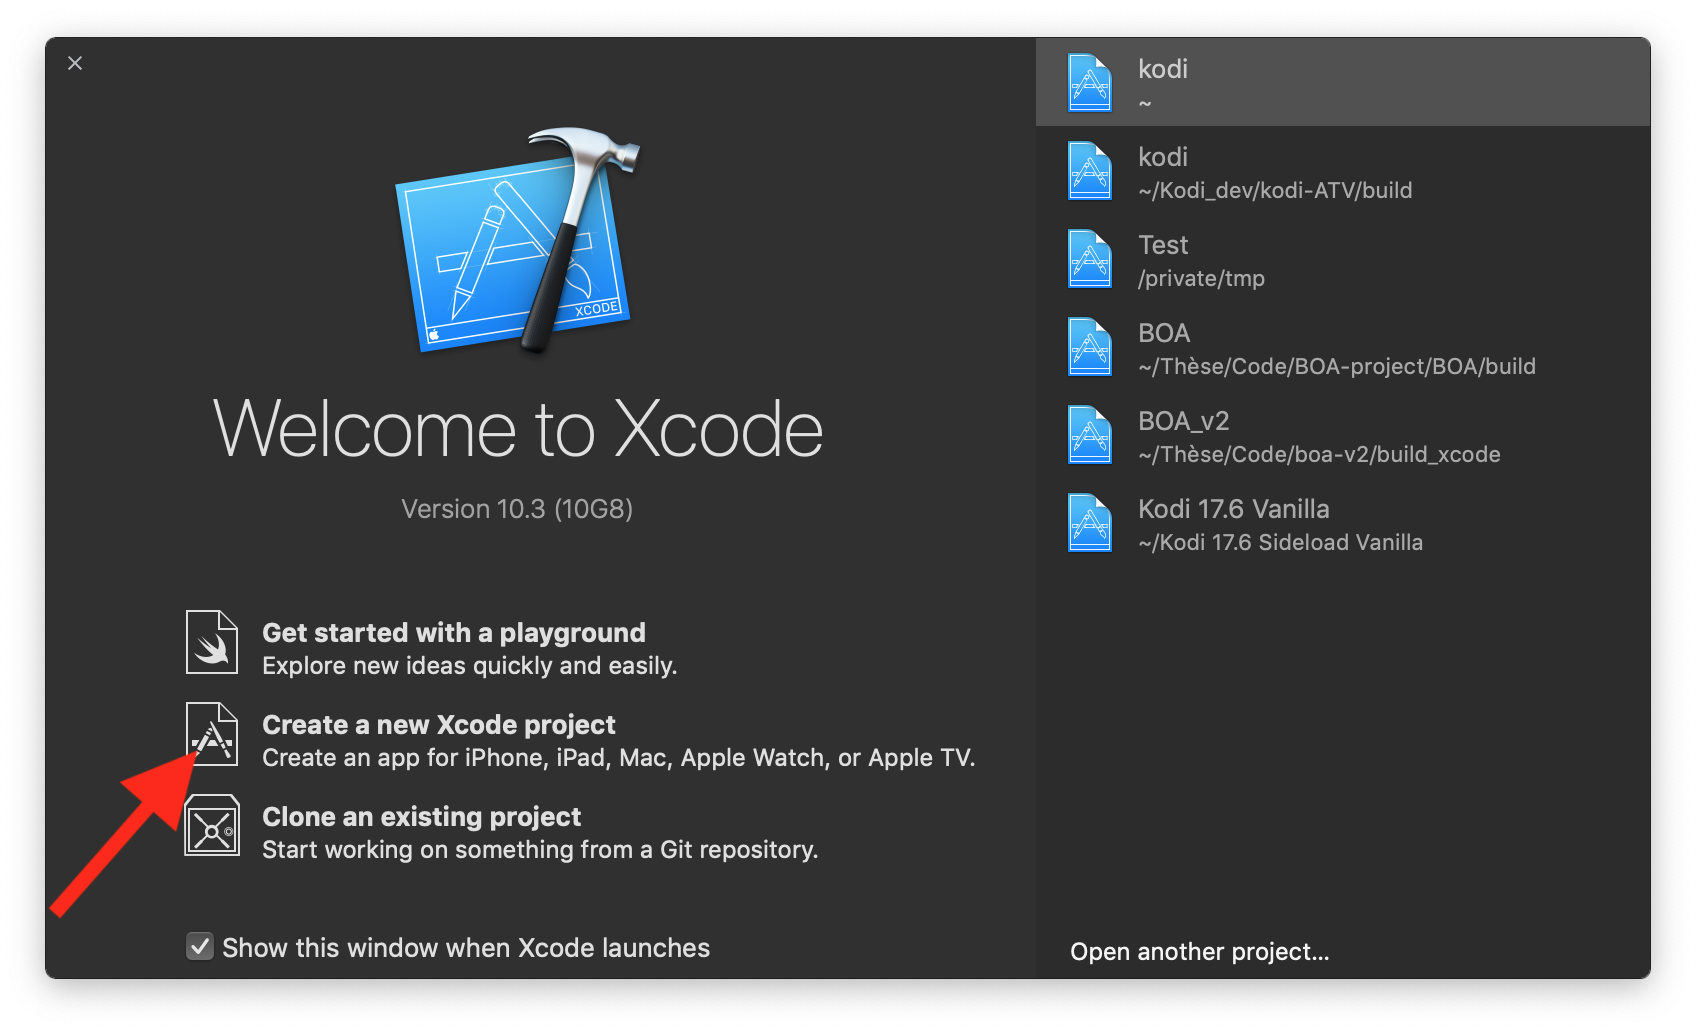 Step 1: Open Xcode and click on "Create a new Xcode project".